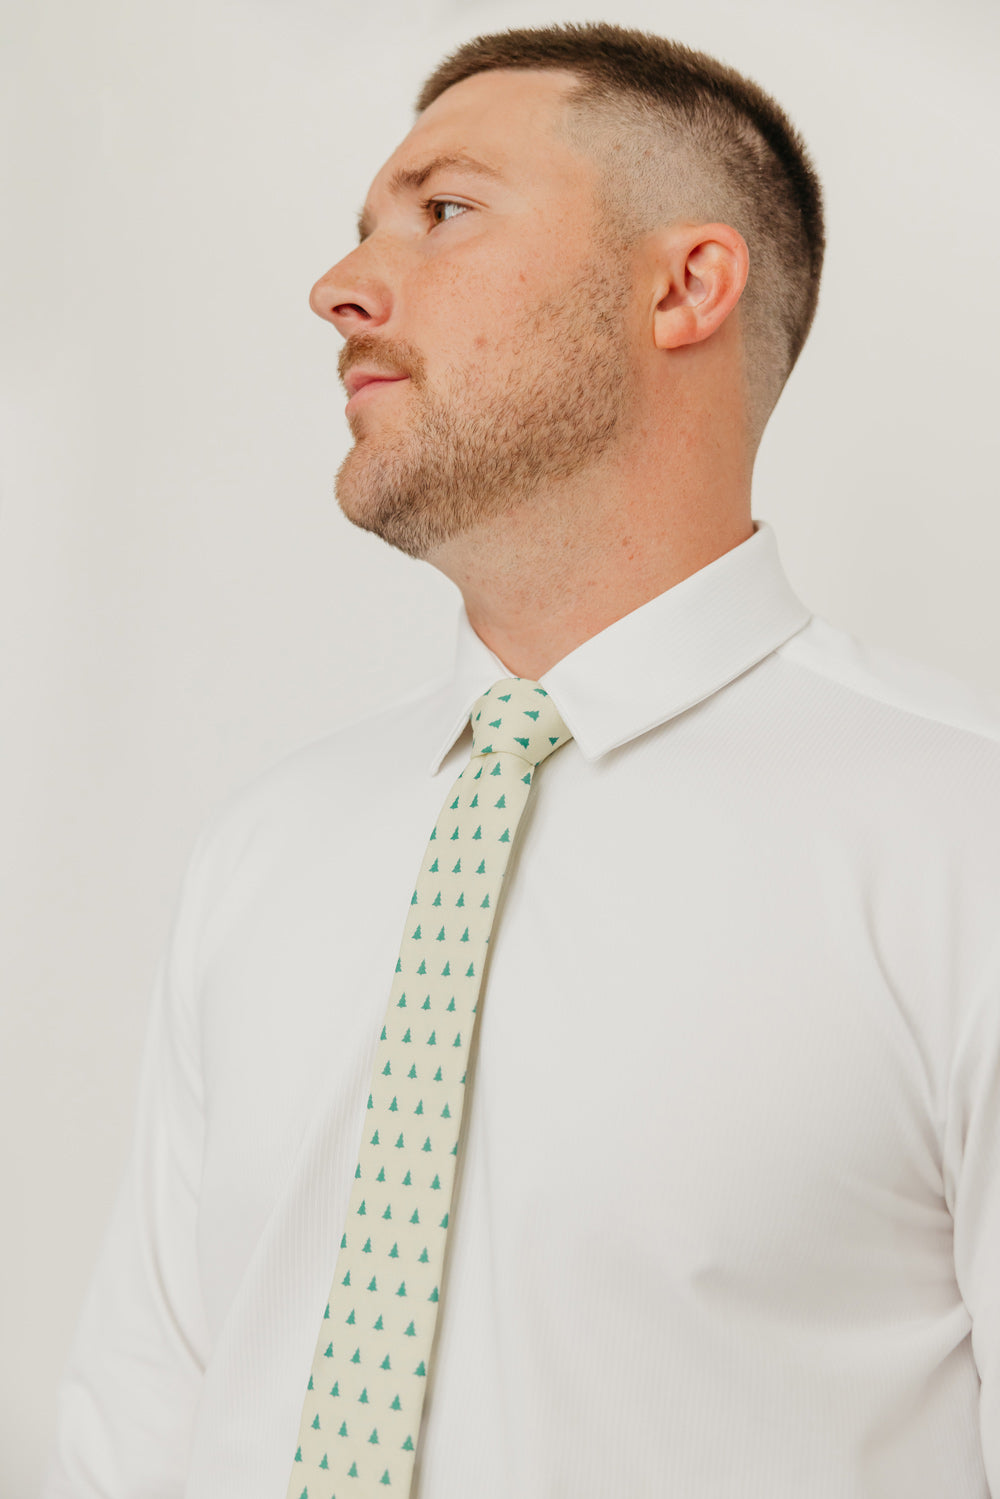 Pine 2.5" Wide Skinny Tie worn with a white shirt.